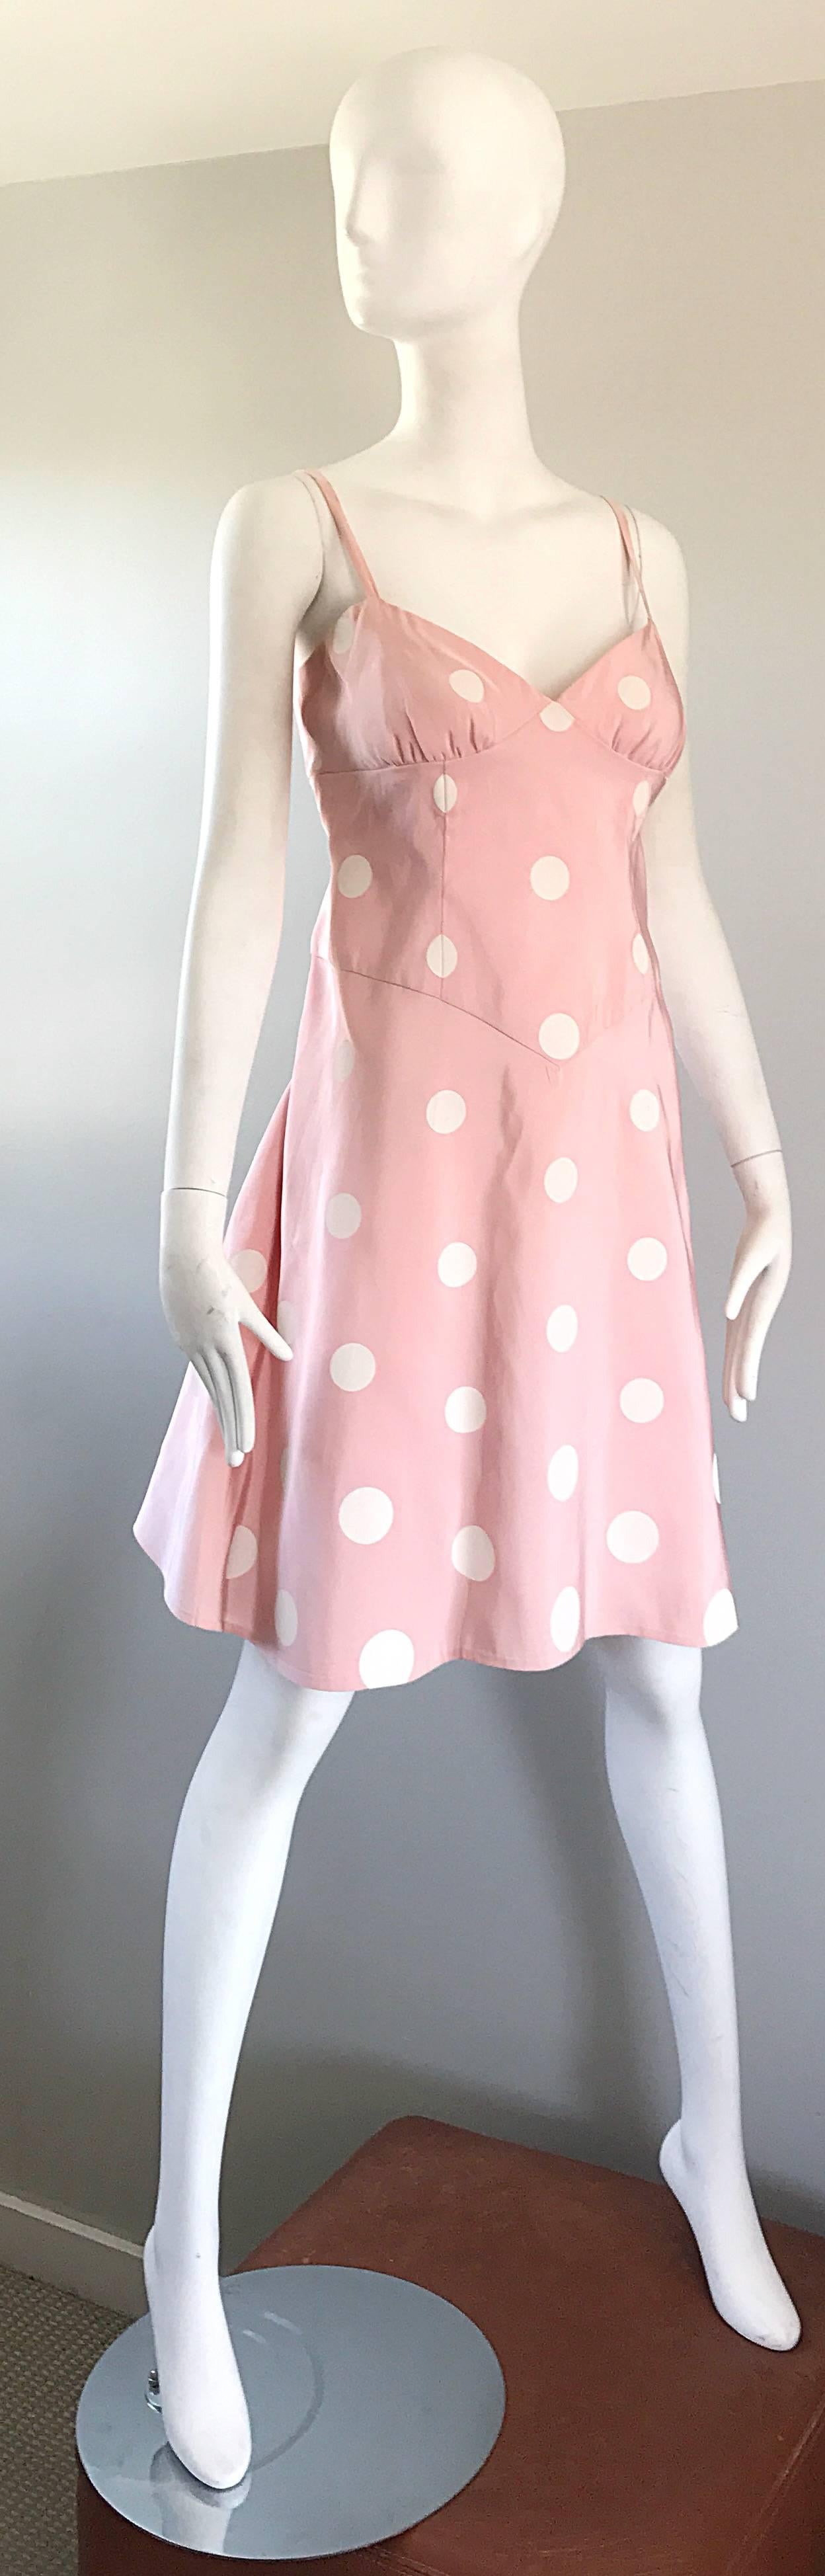 Bill Blass Pink White Polka Dot Hand Painted Fit and Flare Vintage Dress, 1990 In Excellent Condition For Sale In San Diego, CA